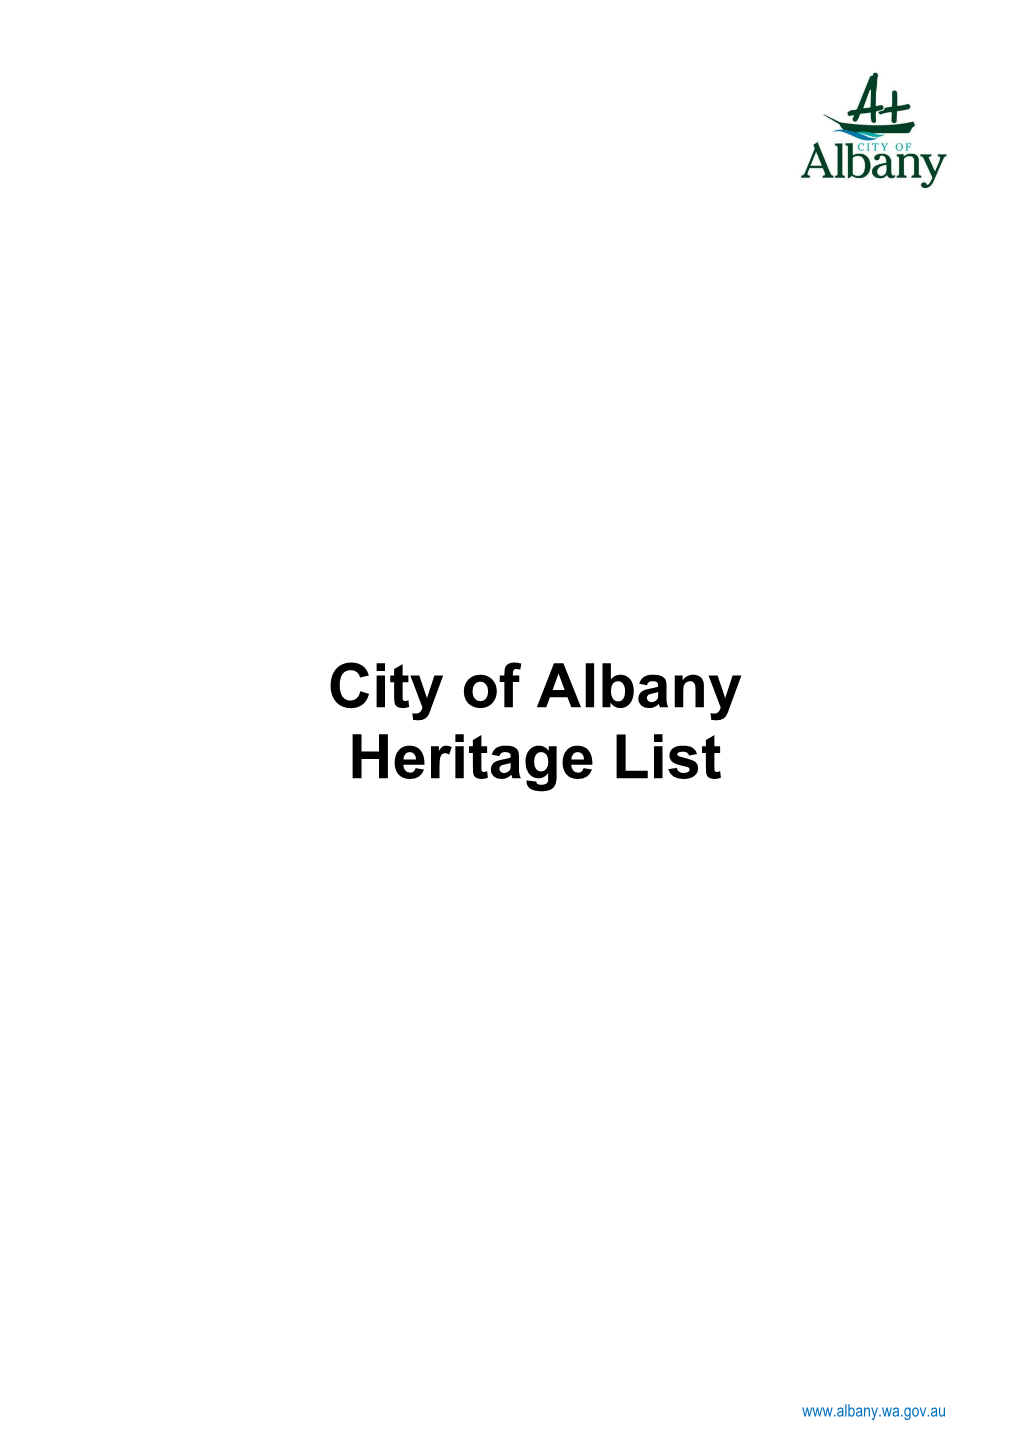 City of Albany Heritage List (Adopted October 2020)